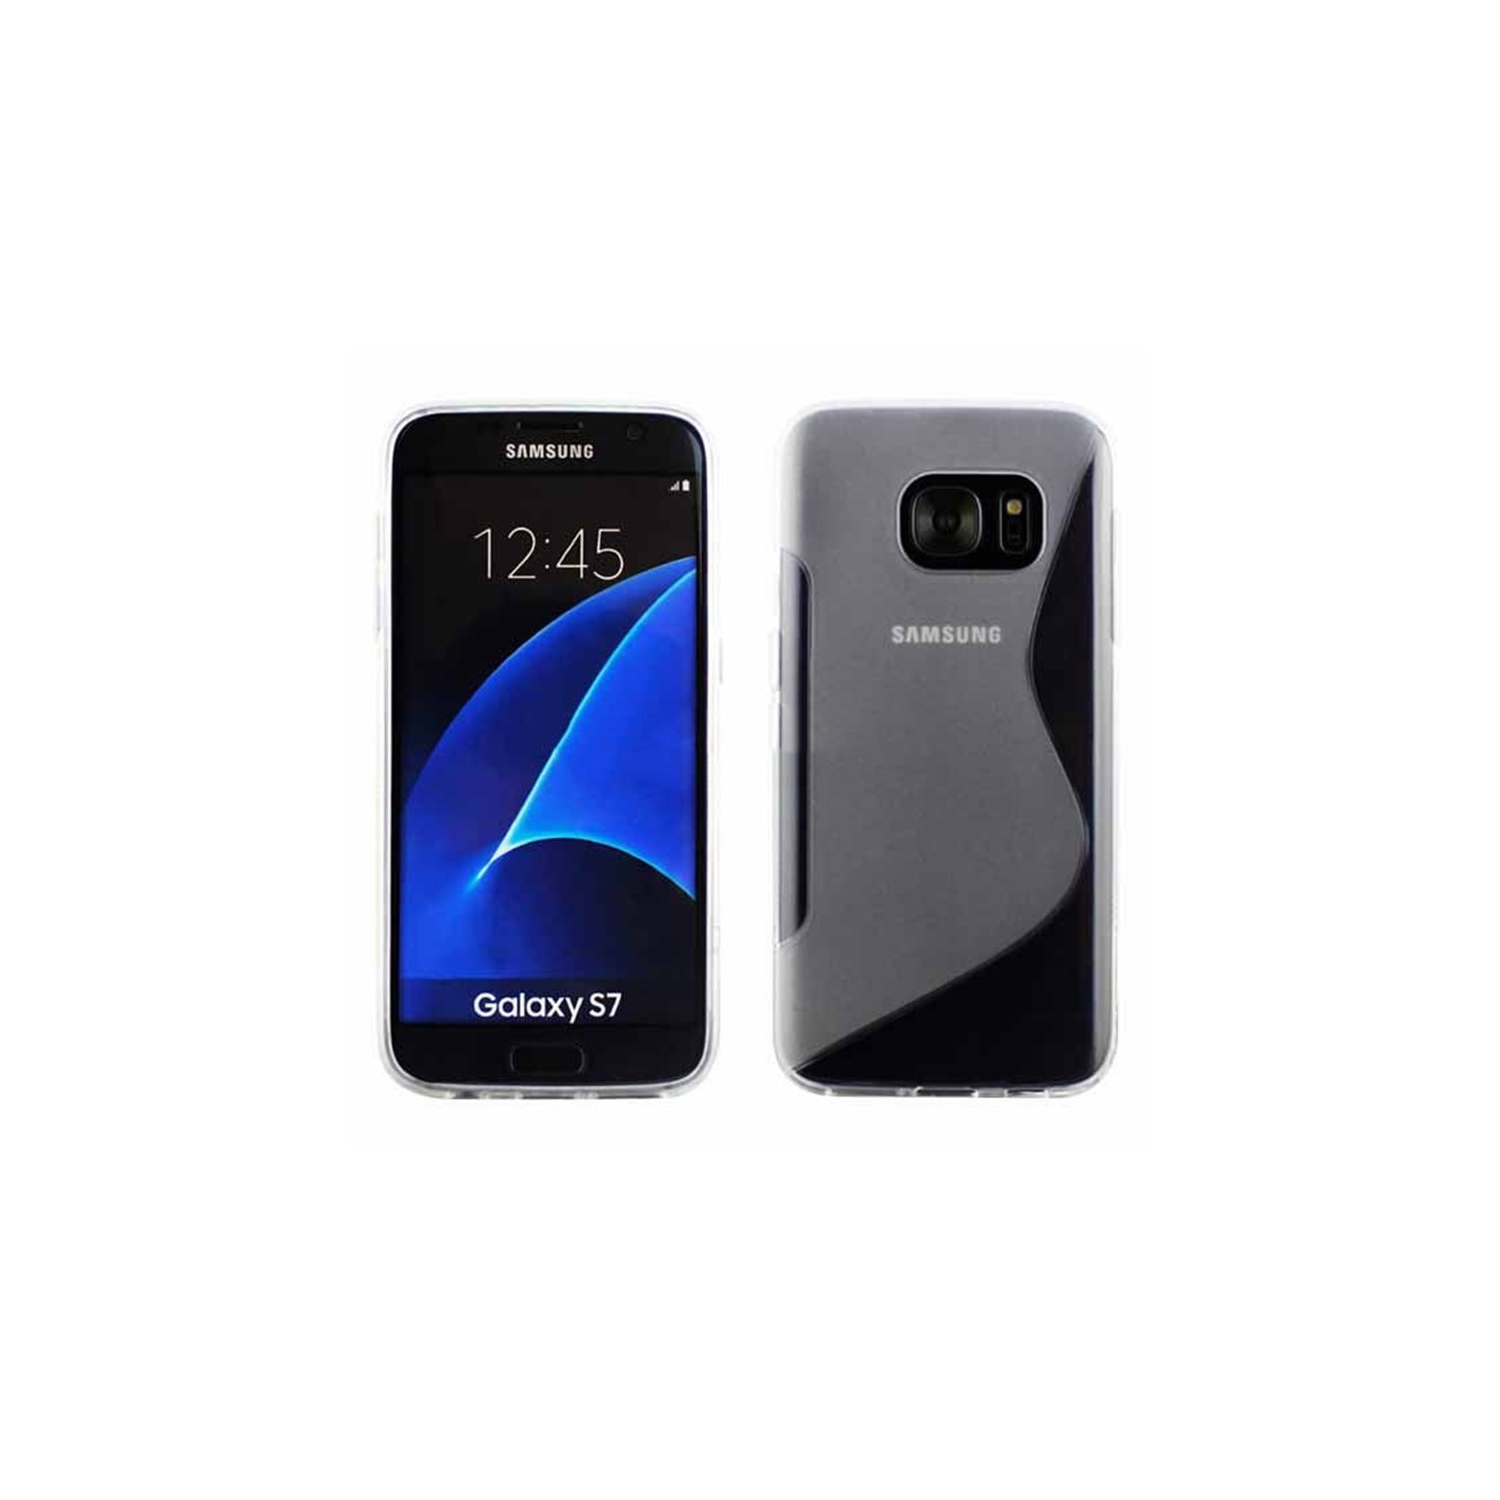 【CSmart】 Ultra Thin Soft TPU Silicone Jelly Bumper Back Cover Case for Samsung Galaxy S7, Clear